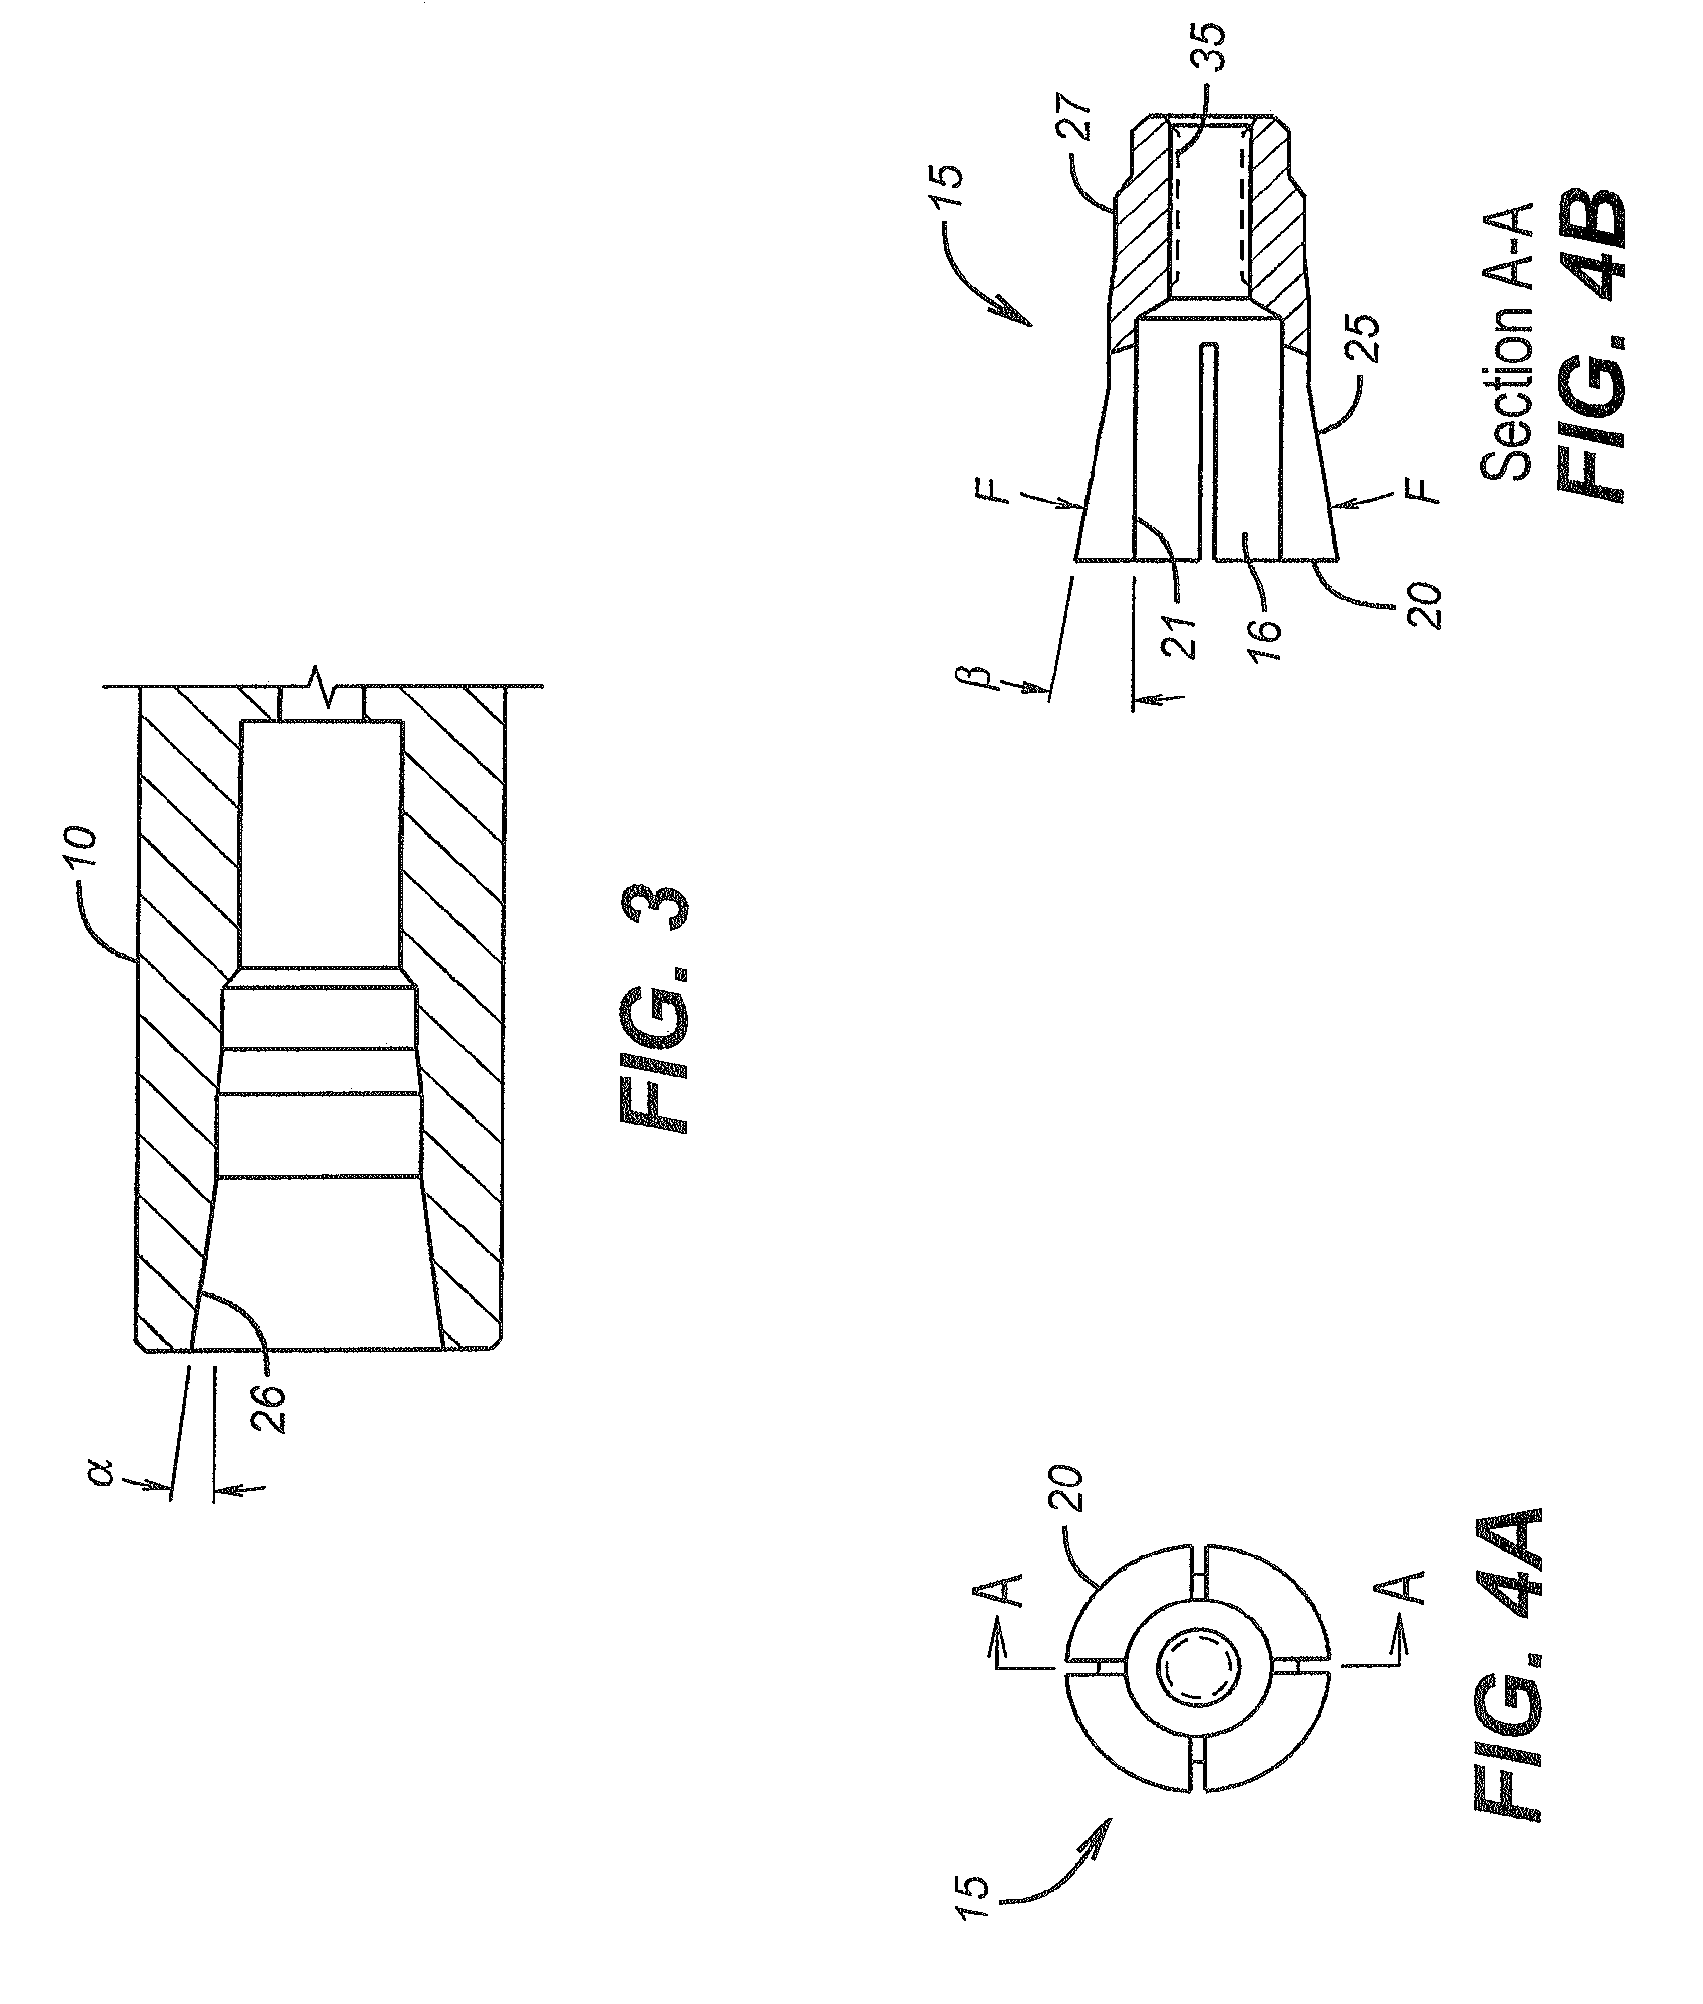 Apparatus and method for electrical and mechanical connection